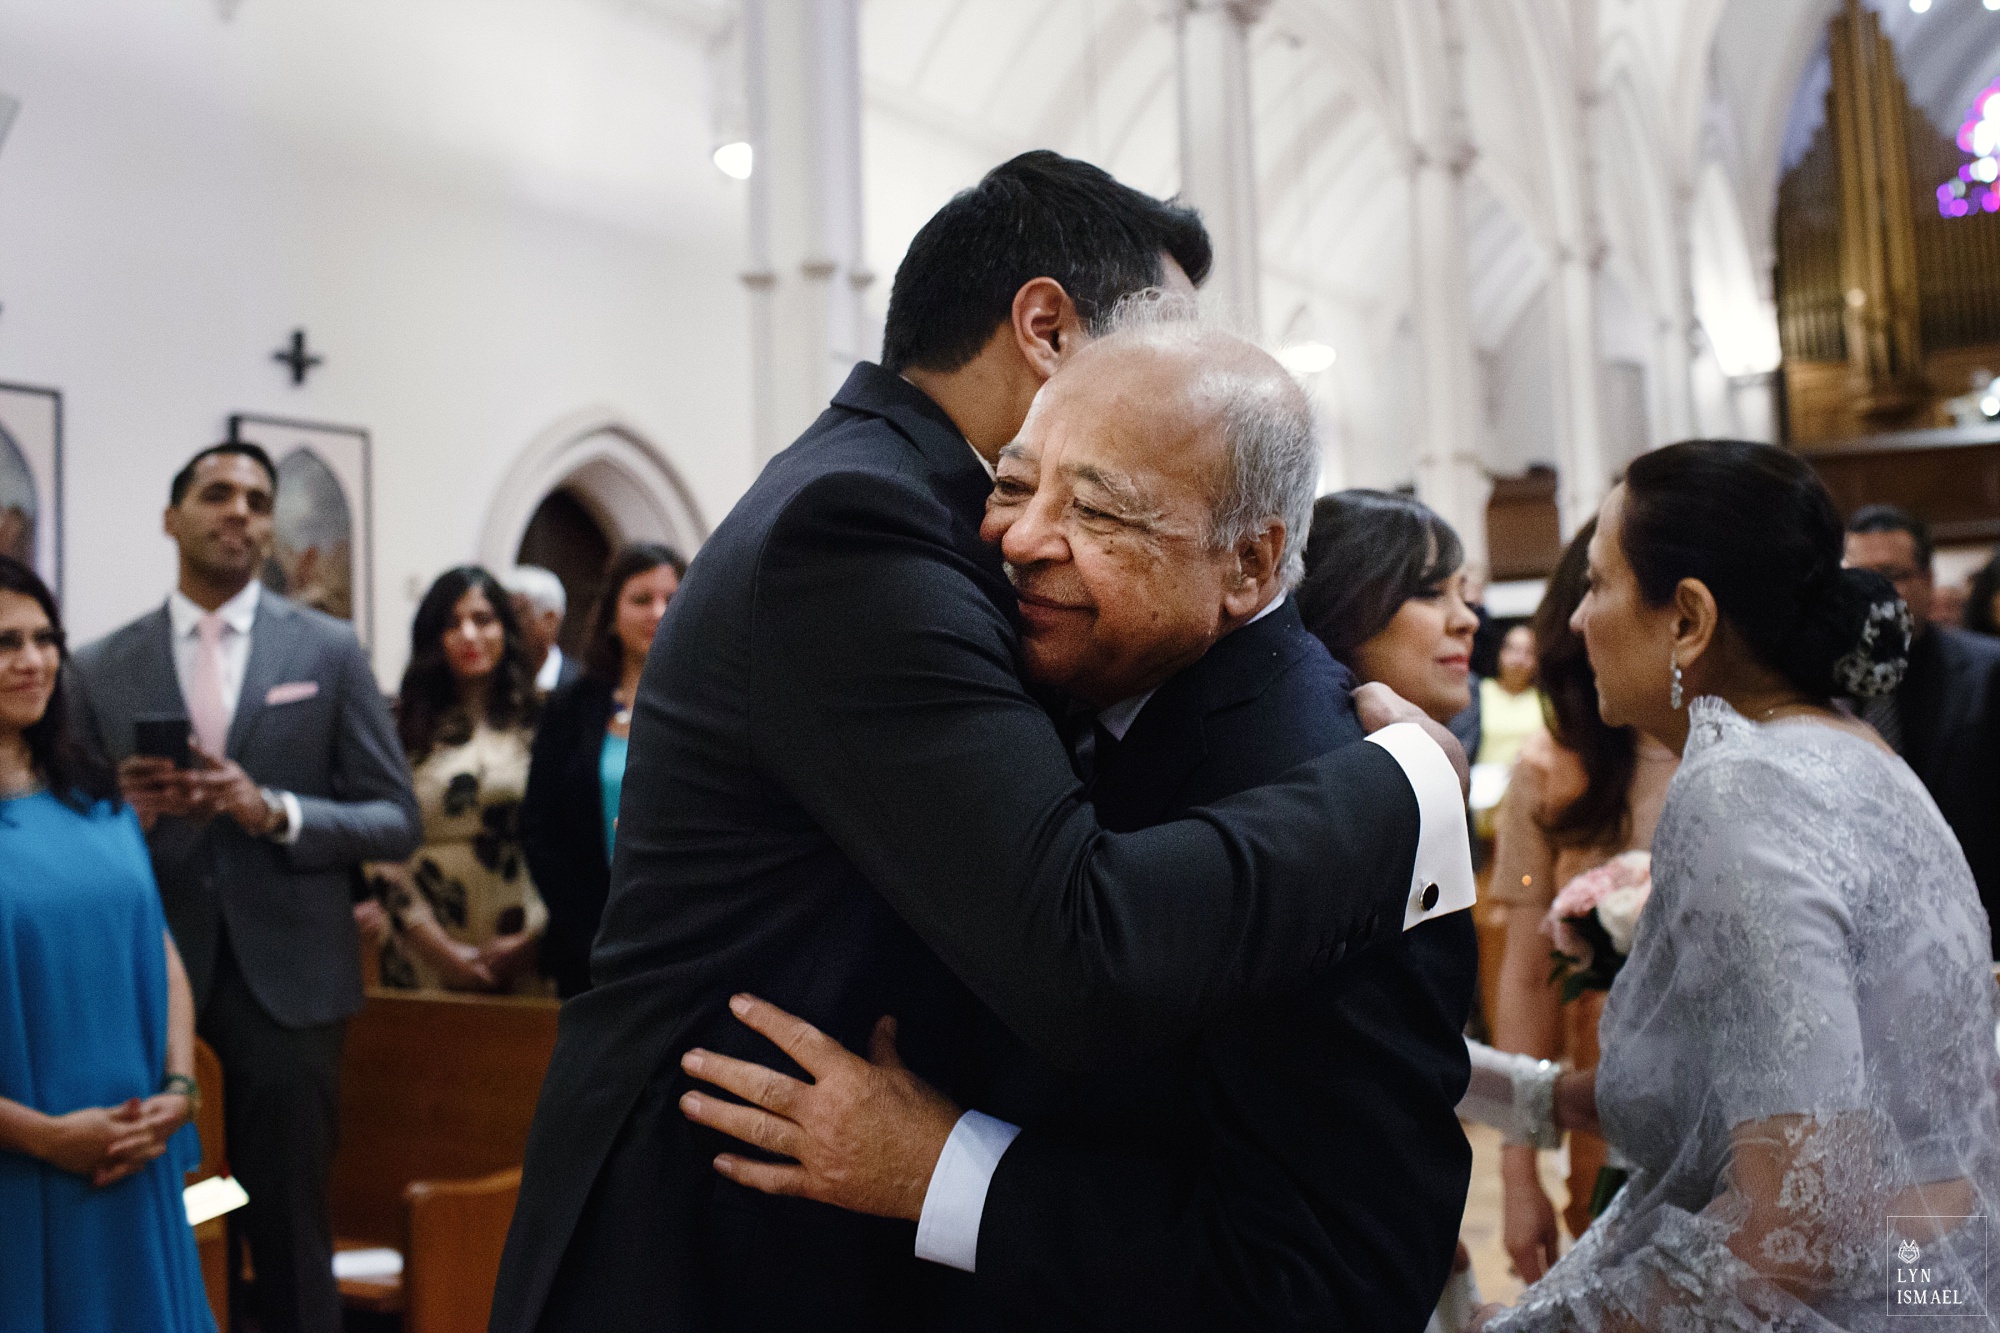 Groom hugs the bride's father at their wedding ceremony at St Basil's Church